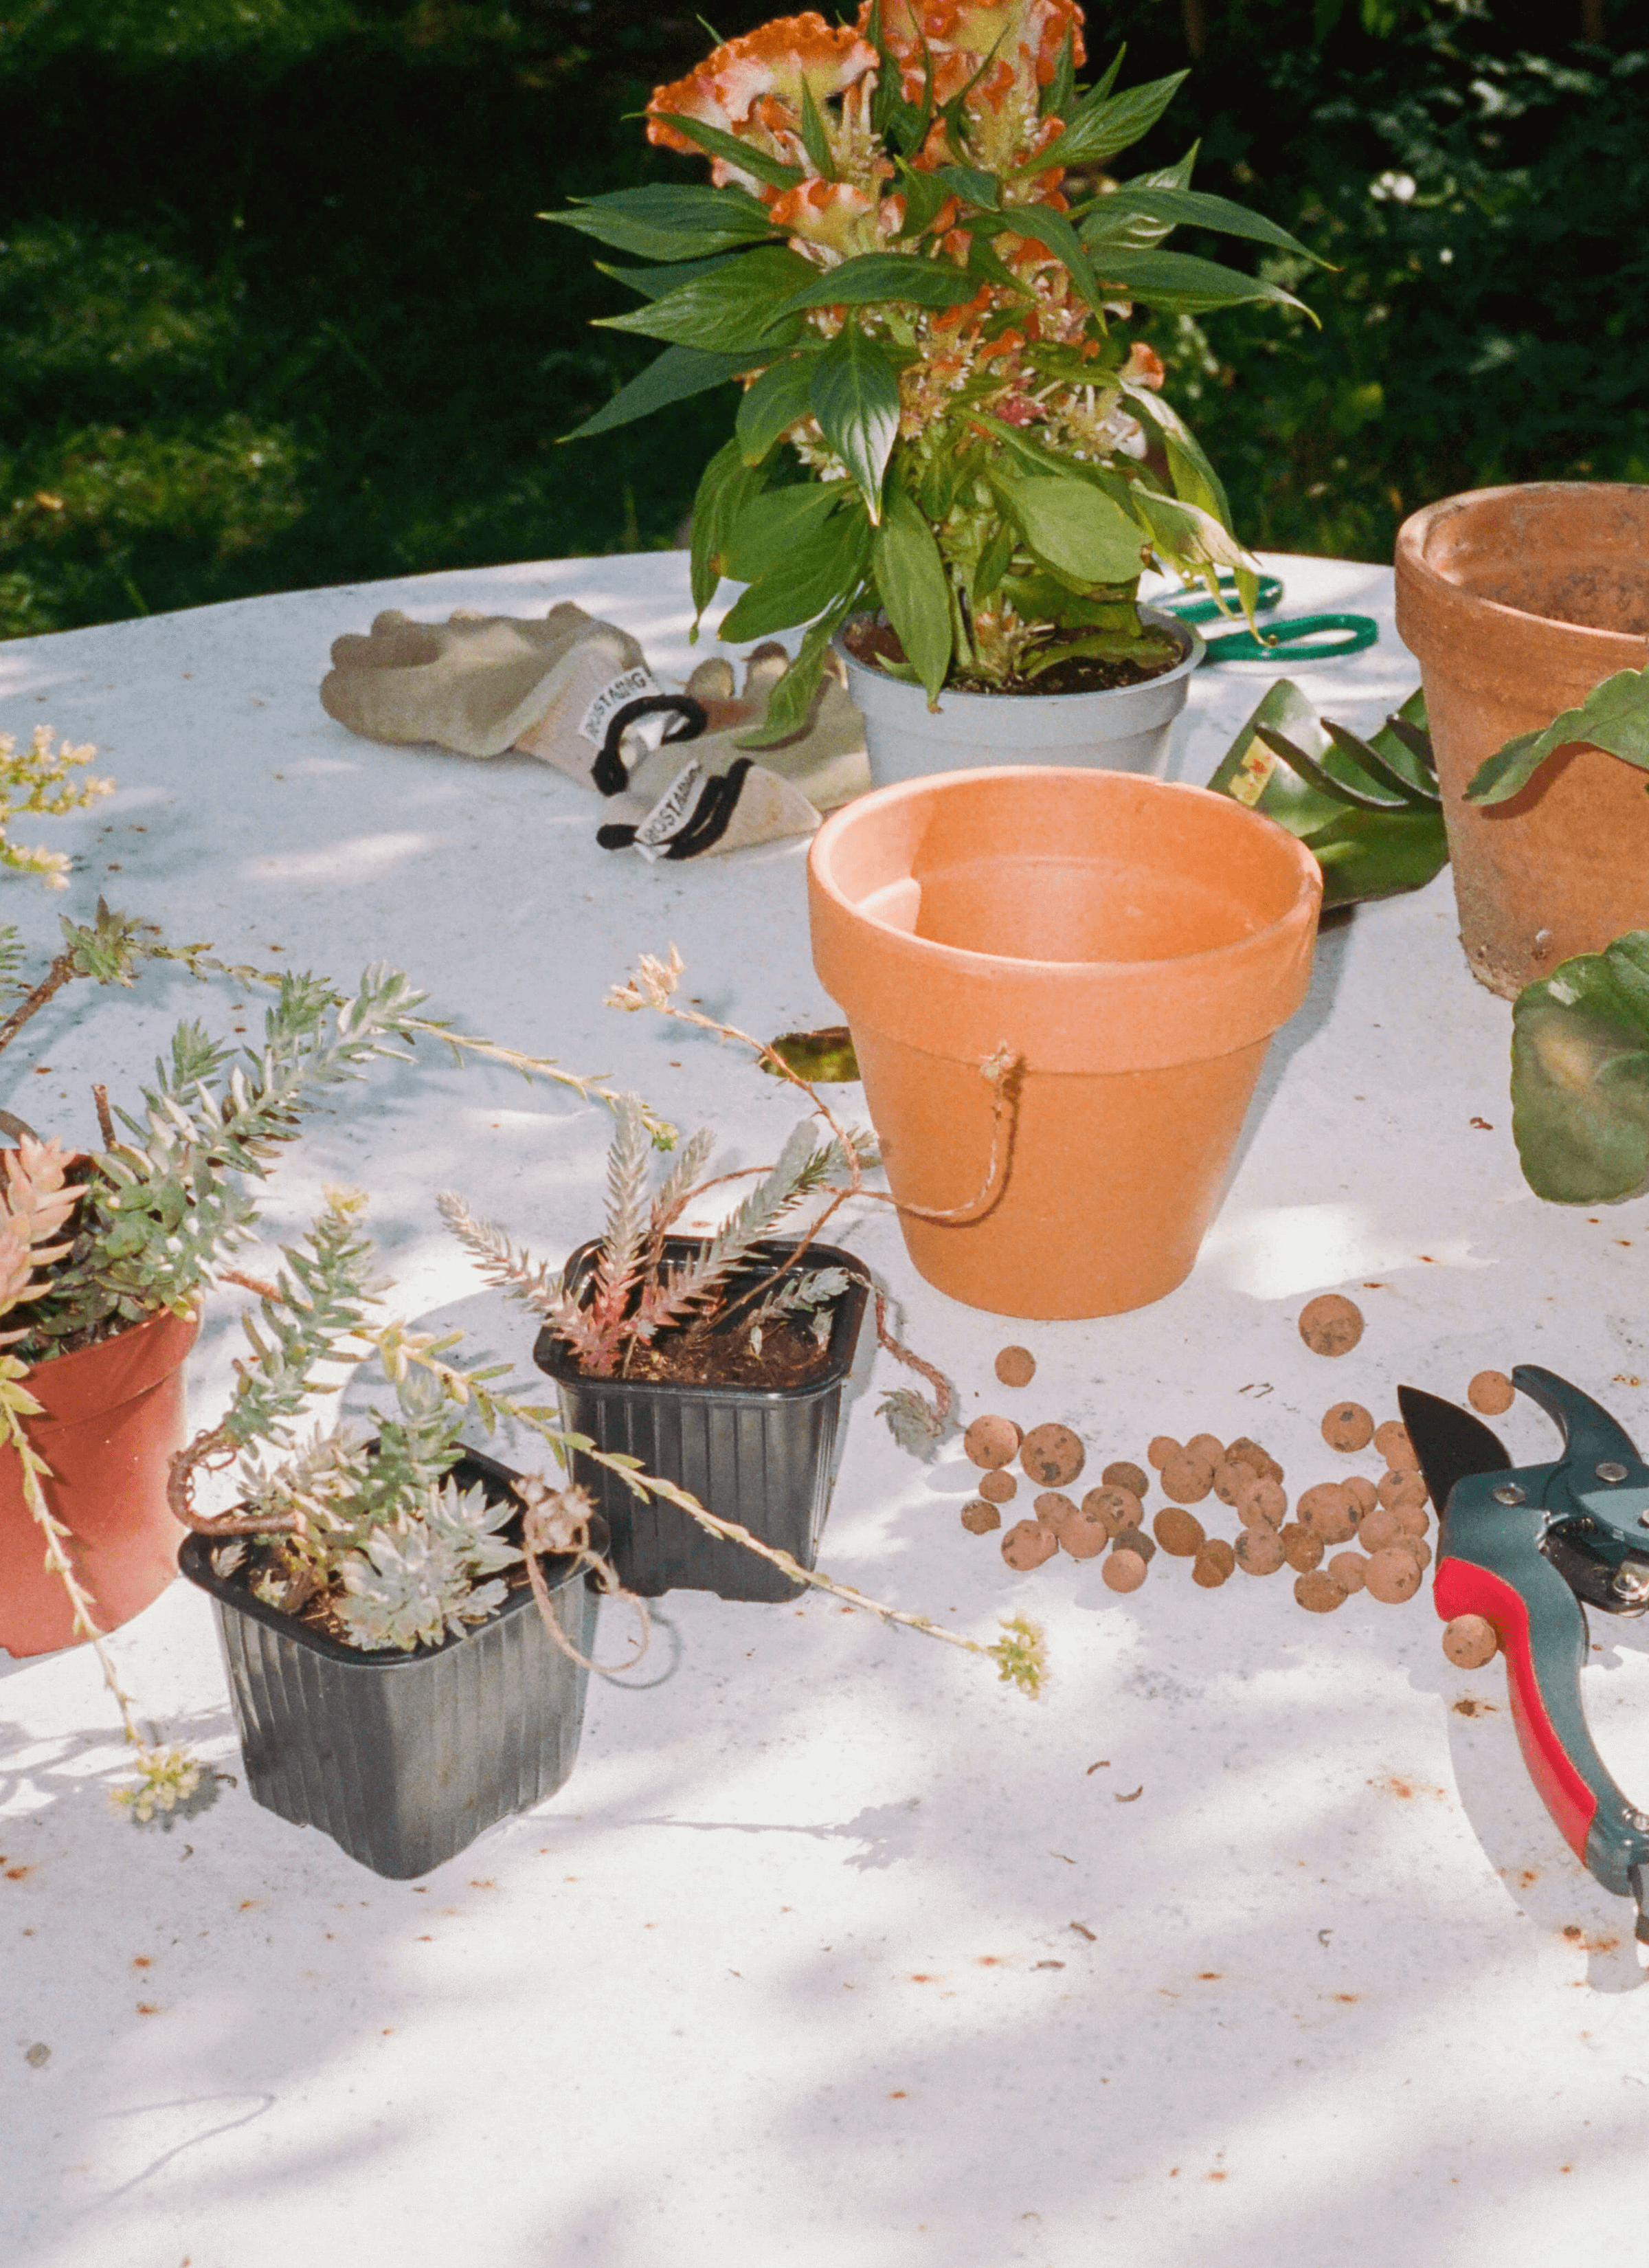 Few pots of plants, a pot of flowers, 2 empty terracotta pots, gardening gloves and secateurs (gardening shears) on the table.